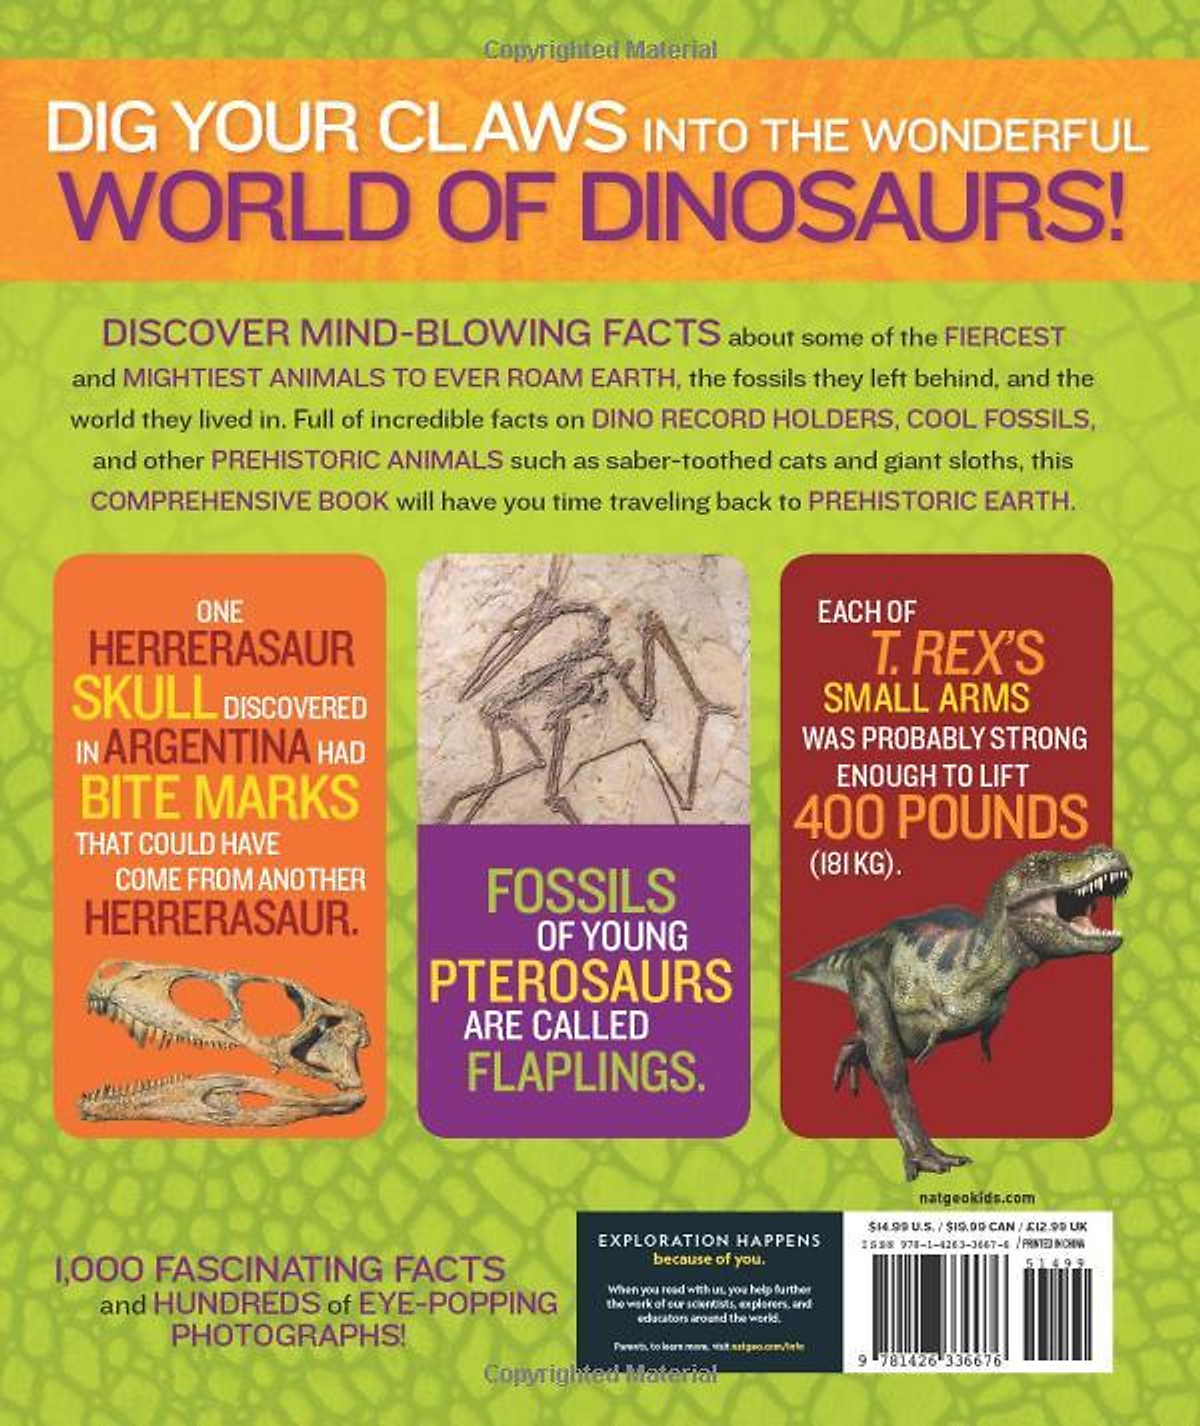 1,000 Facts About Dinosaurs, Fossils, And Prehistoric Life